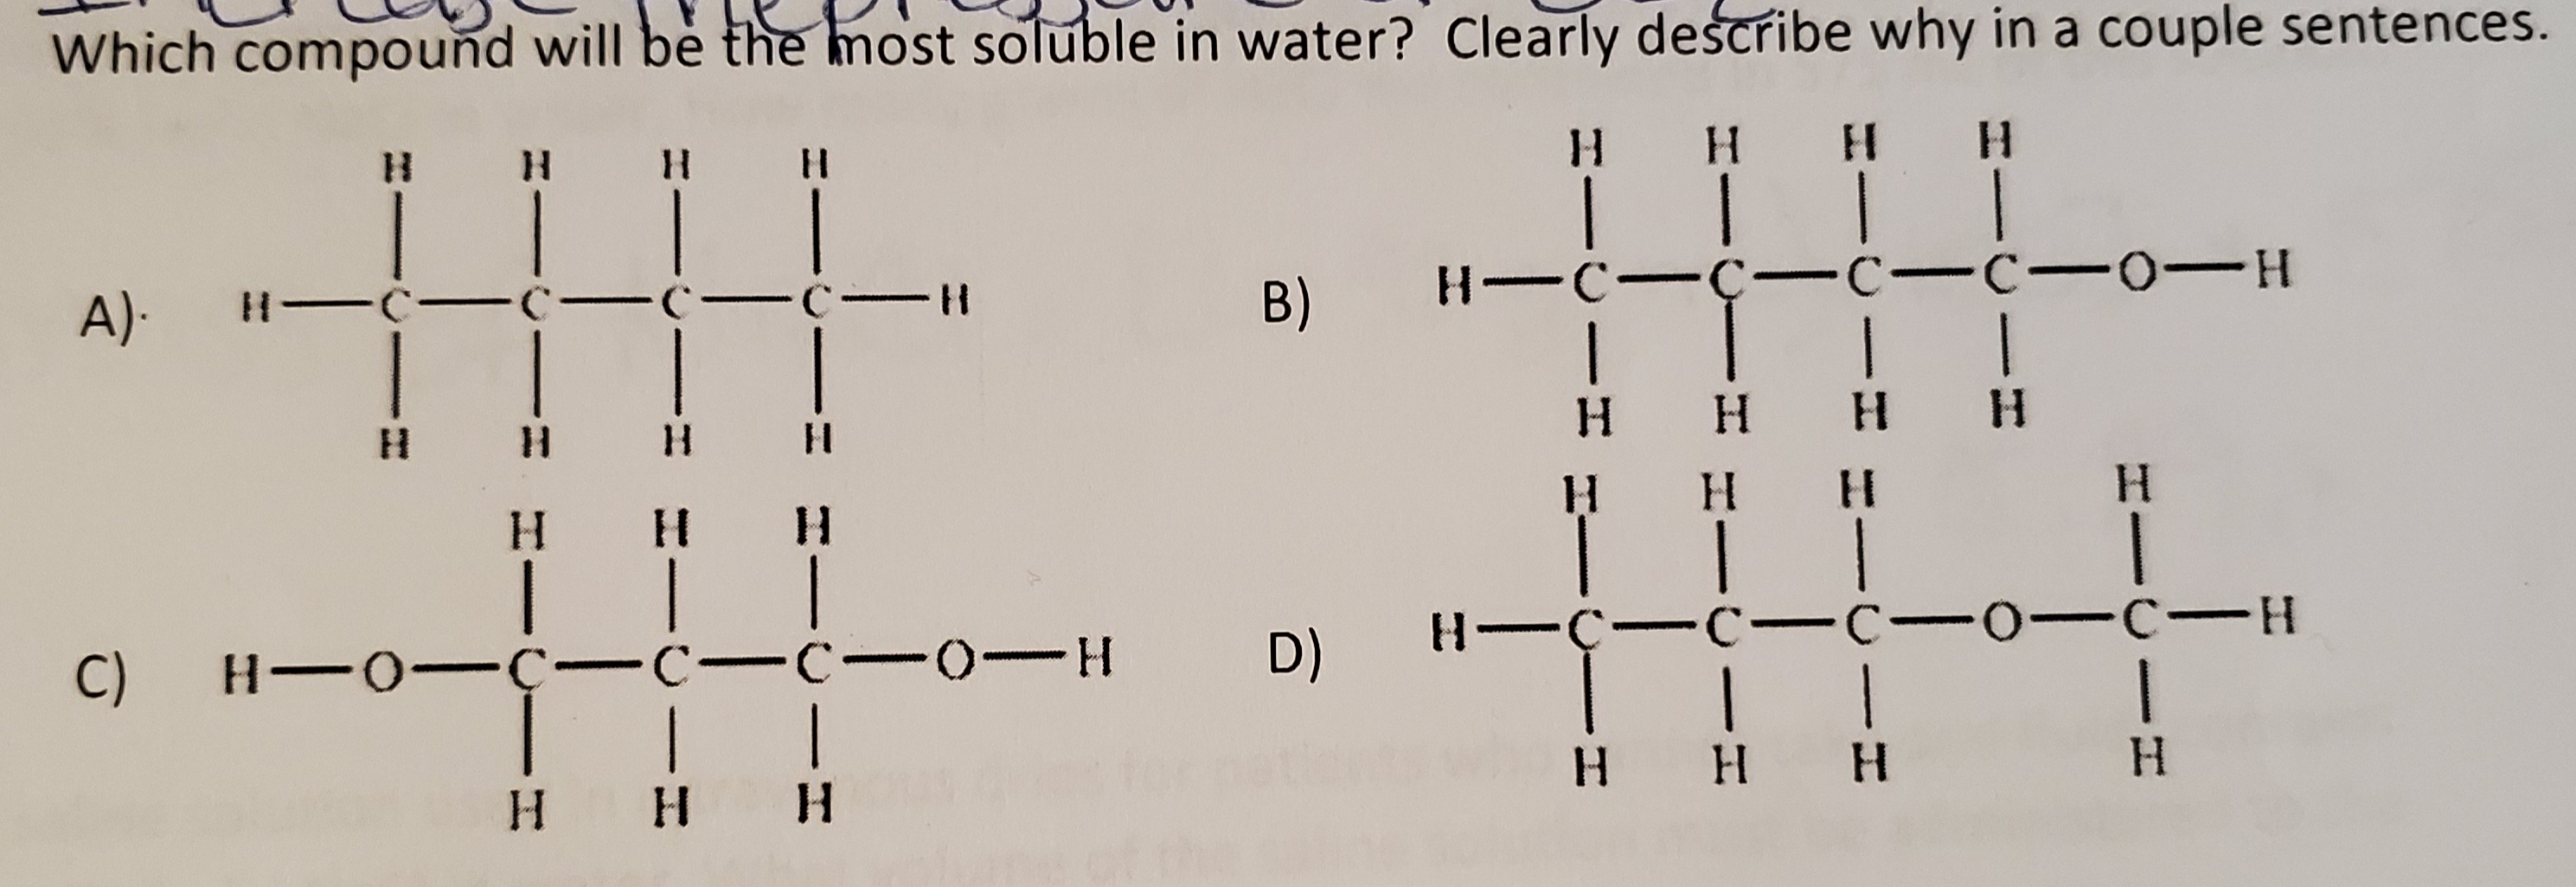 Which compound will bè the most soluble in water? Clearly describe why in a couple sentences.
H.
H.
H HH
A)-
H C- C-C- C-H
B)
H-C-Ç- c-C-0-H
H H H H
H.
H.
H.
H.
C)
H-0-Ç- C-C-0-H
D)
H-C-C- C-0-C-H
H H H
H H H
H.
